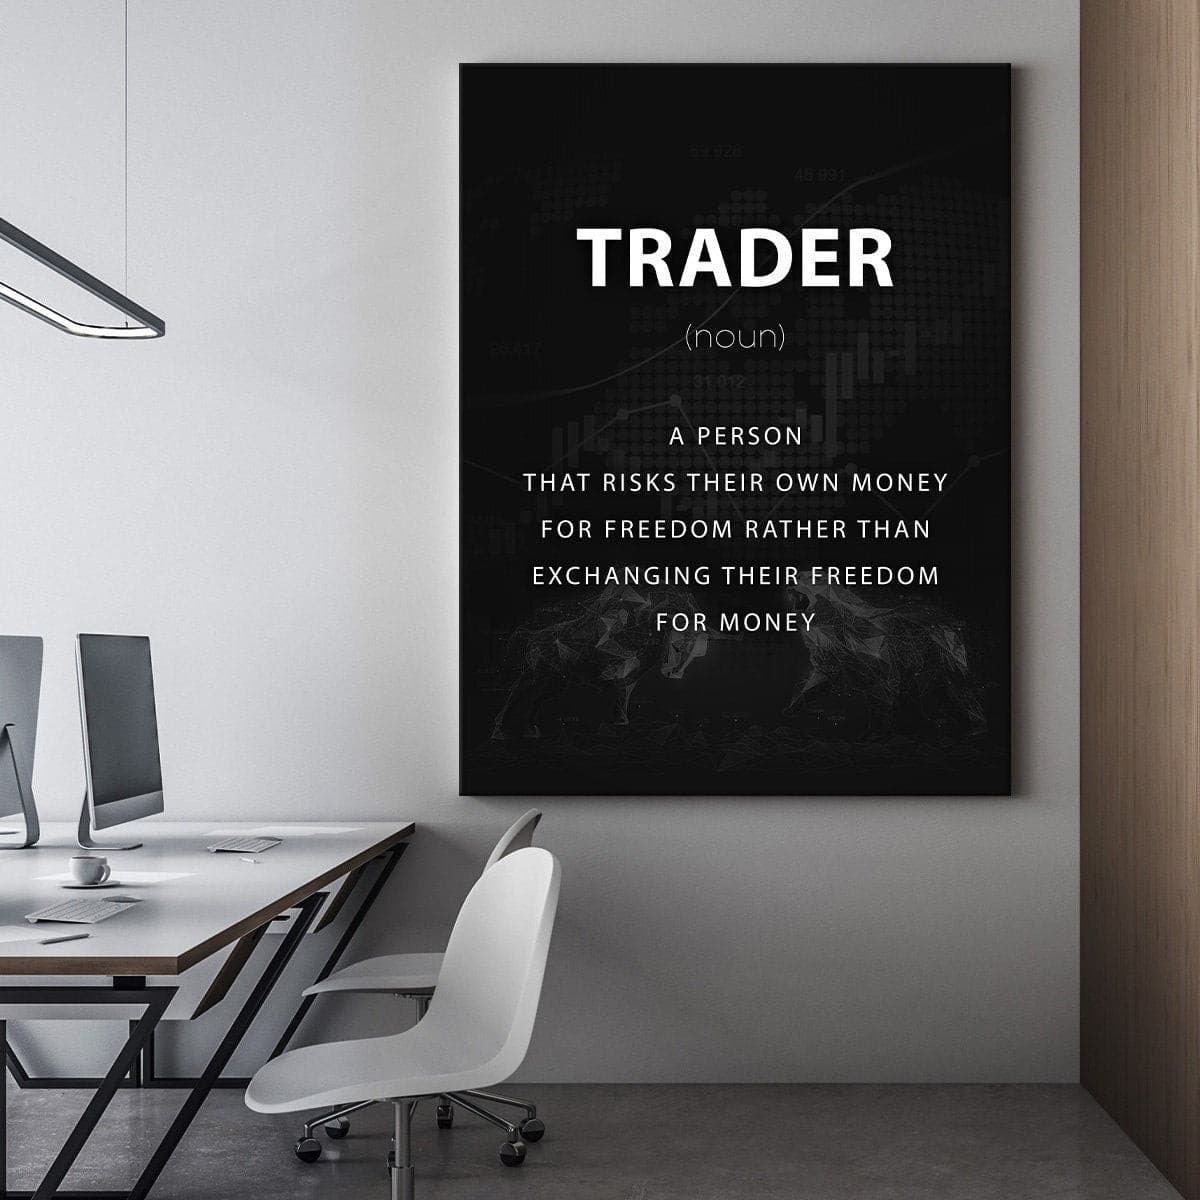 Define Trader - KME means the very best